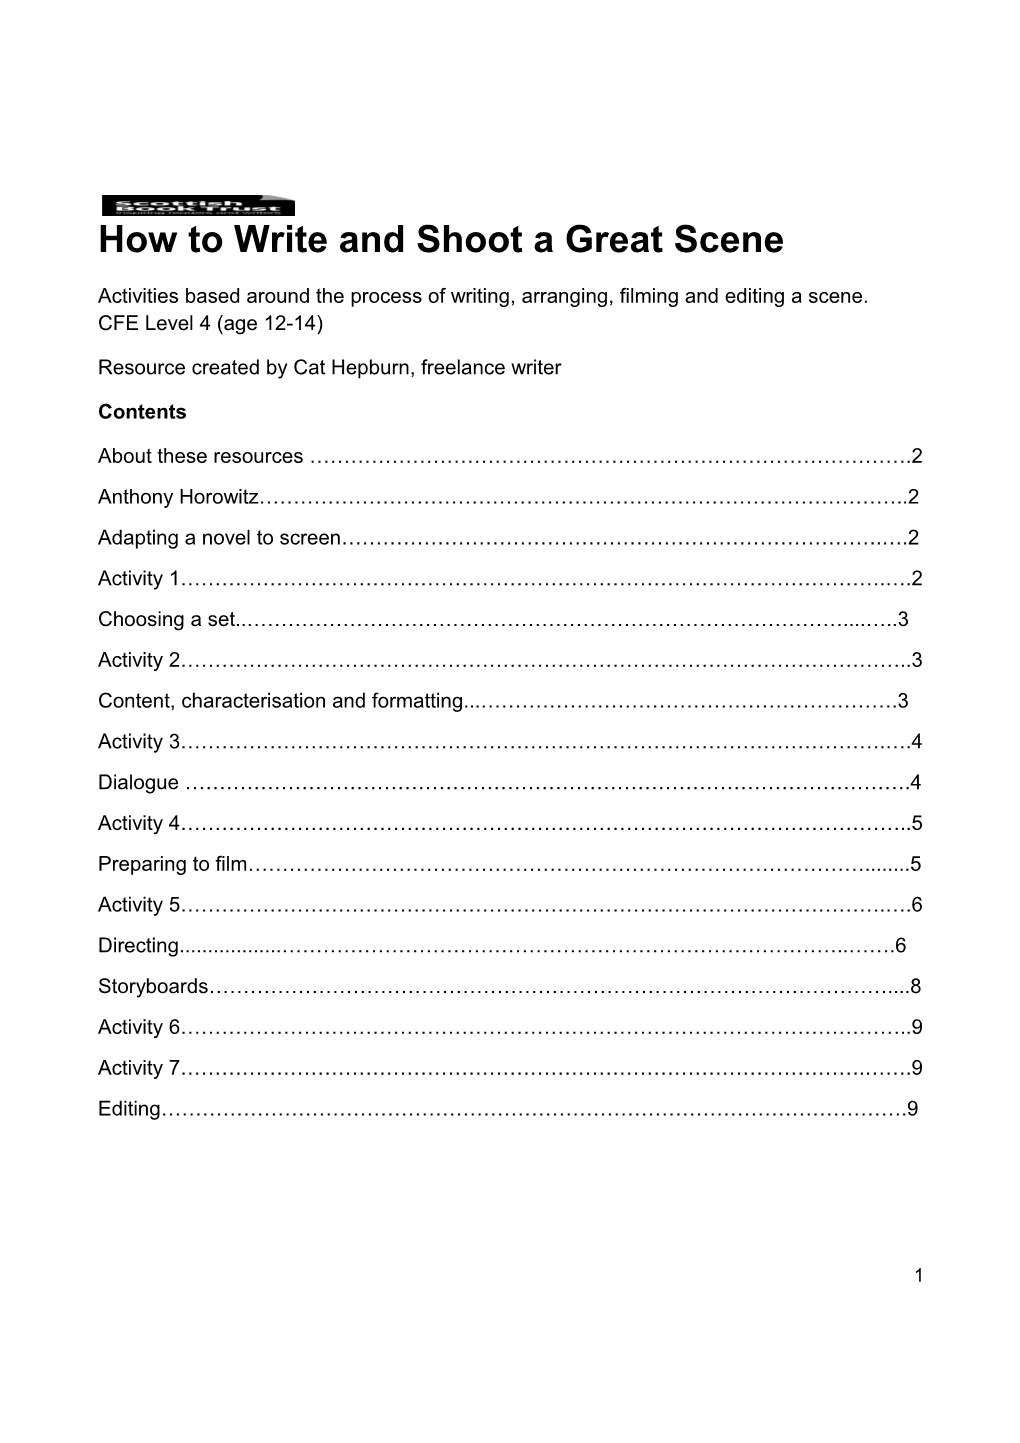 How to Write and Shoot a Great Scene